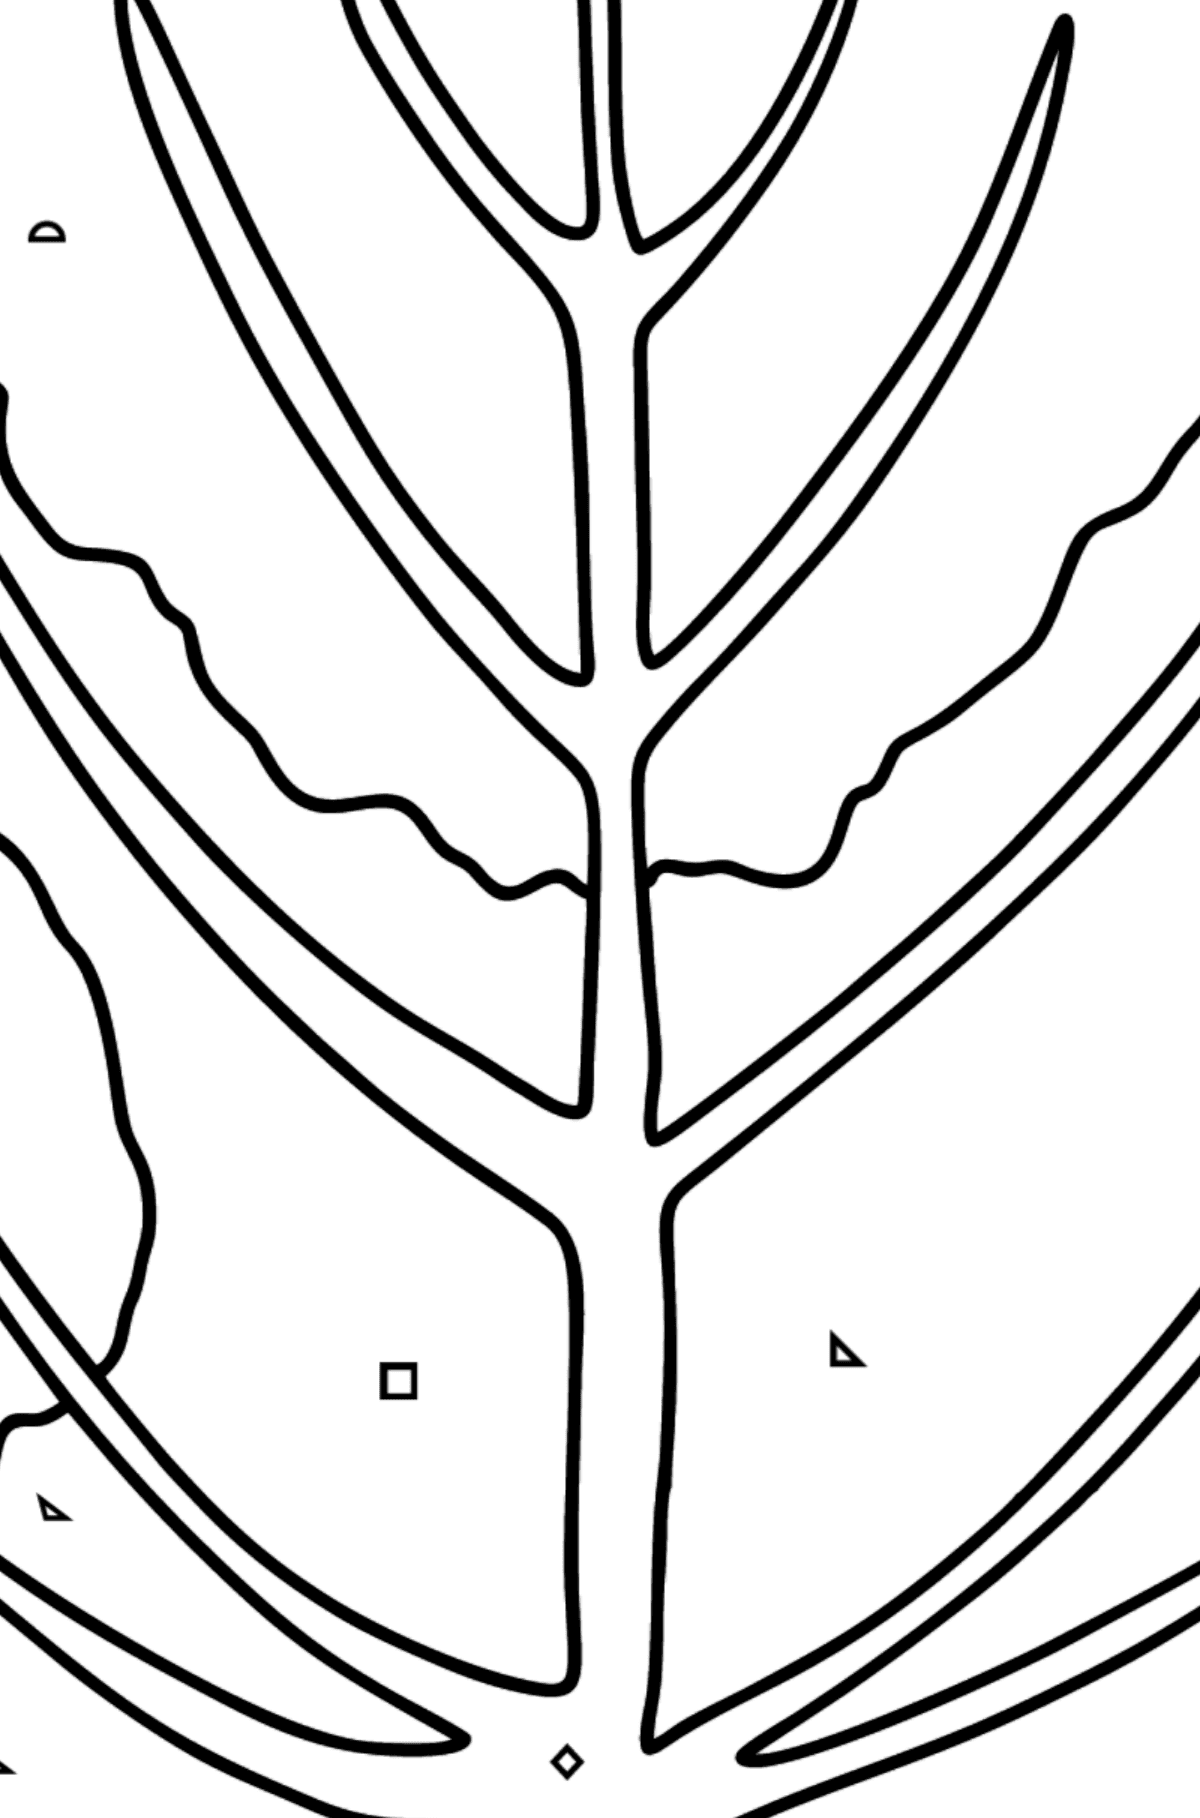 Aspen Leaf coloring page - Coloring by Geometric Shapes for Kids